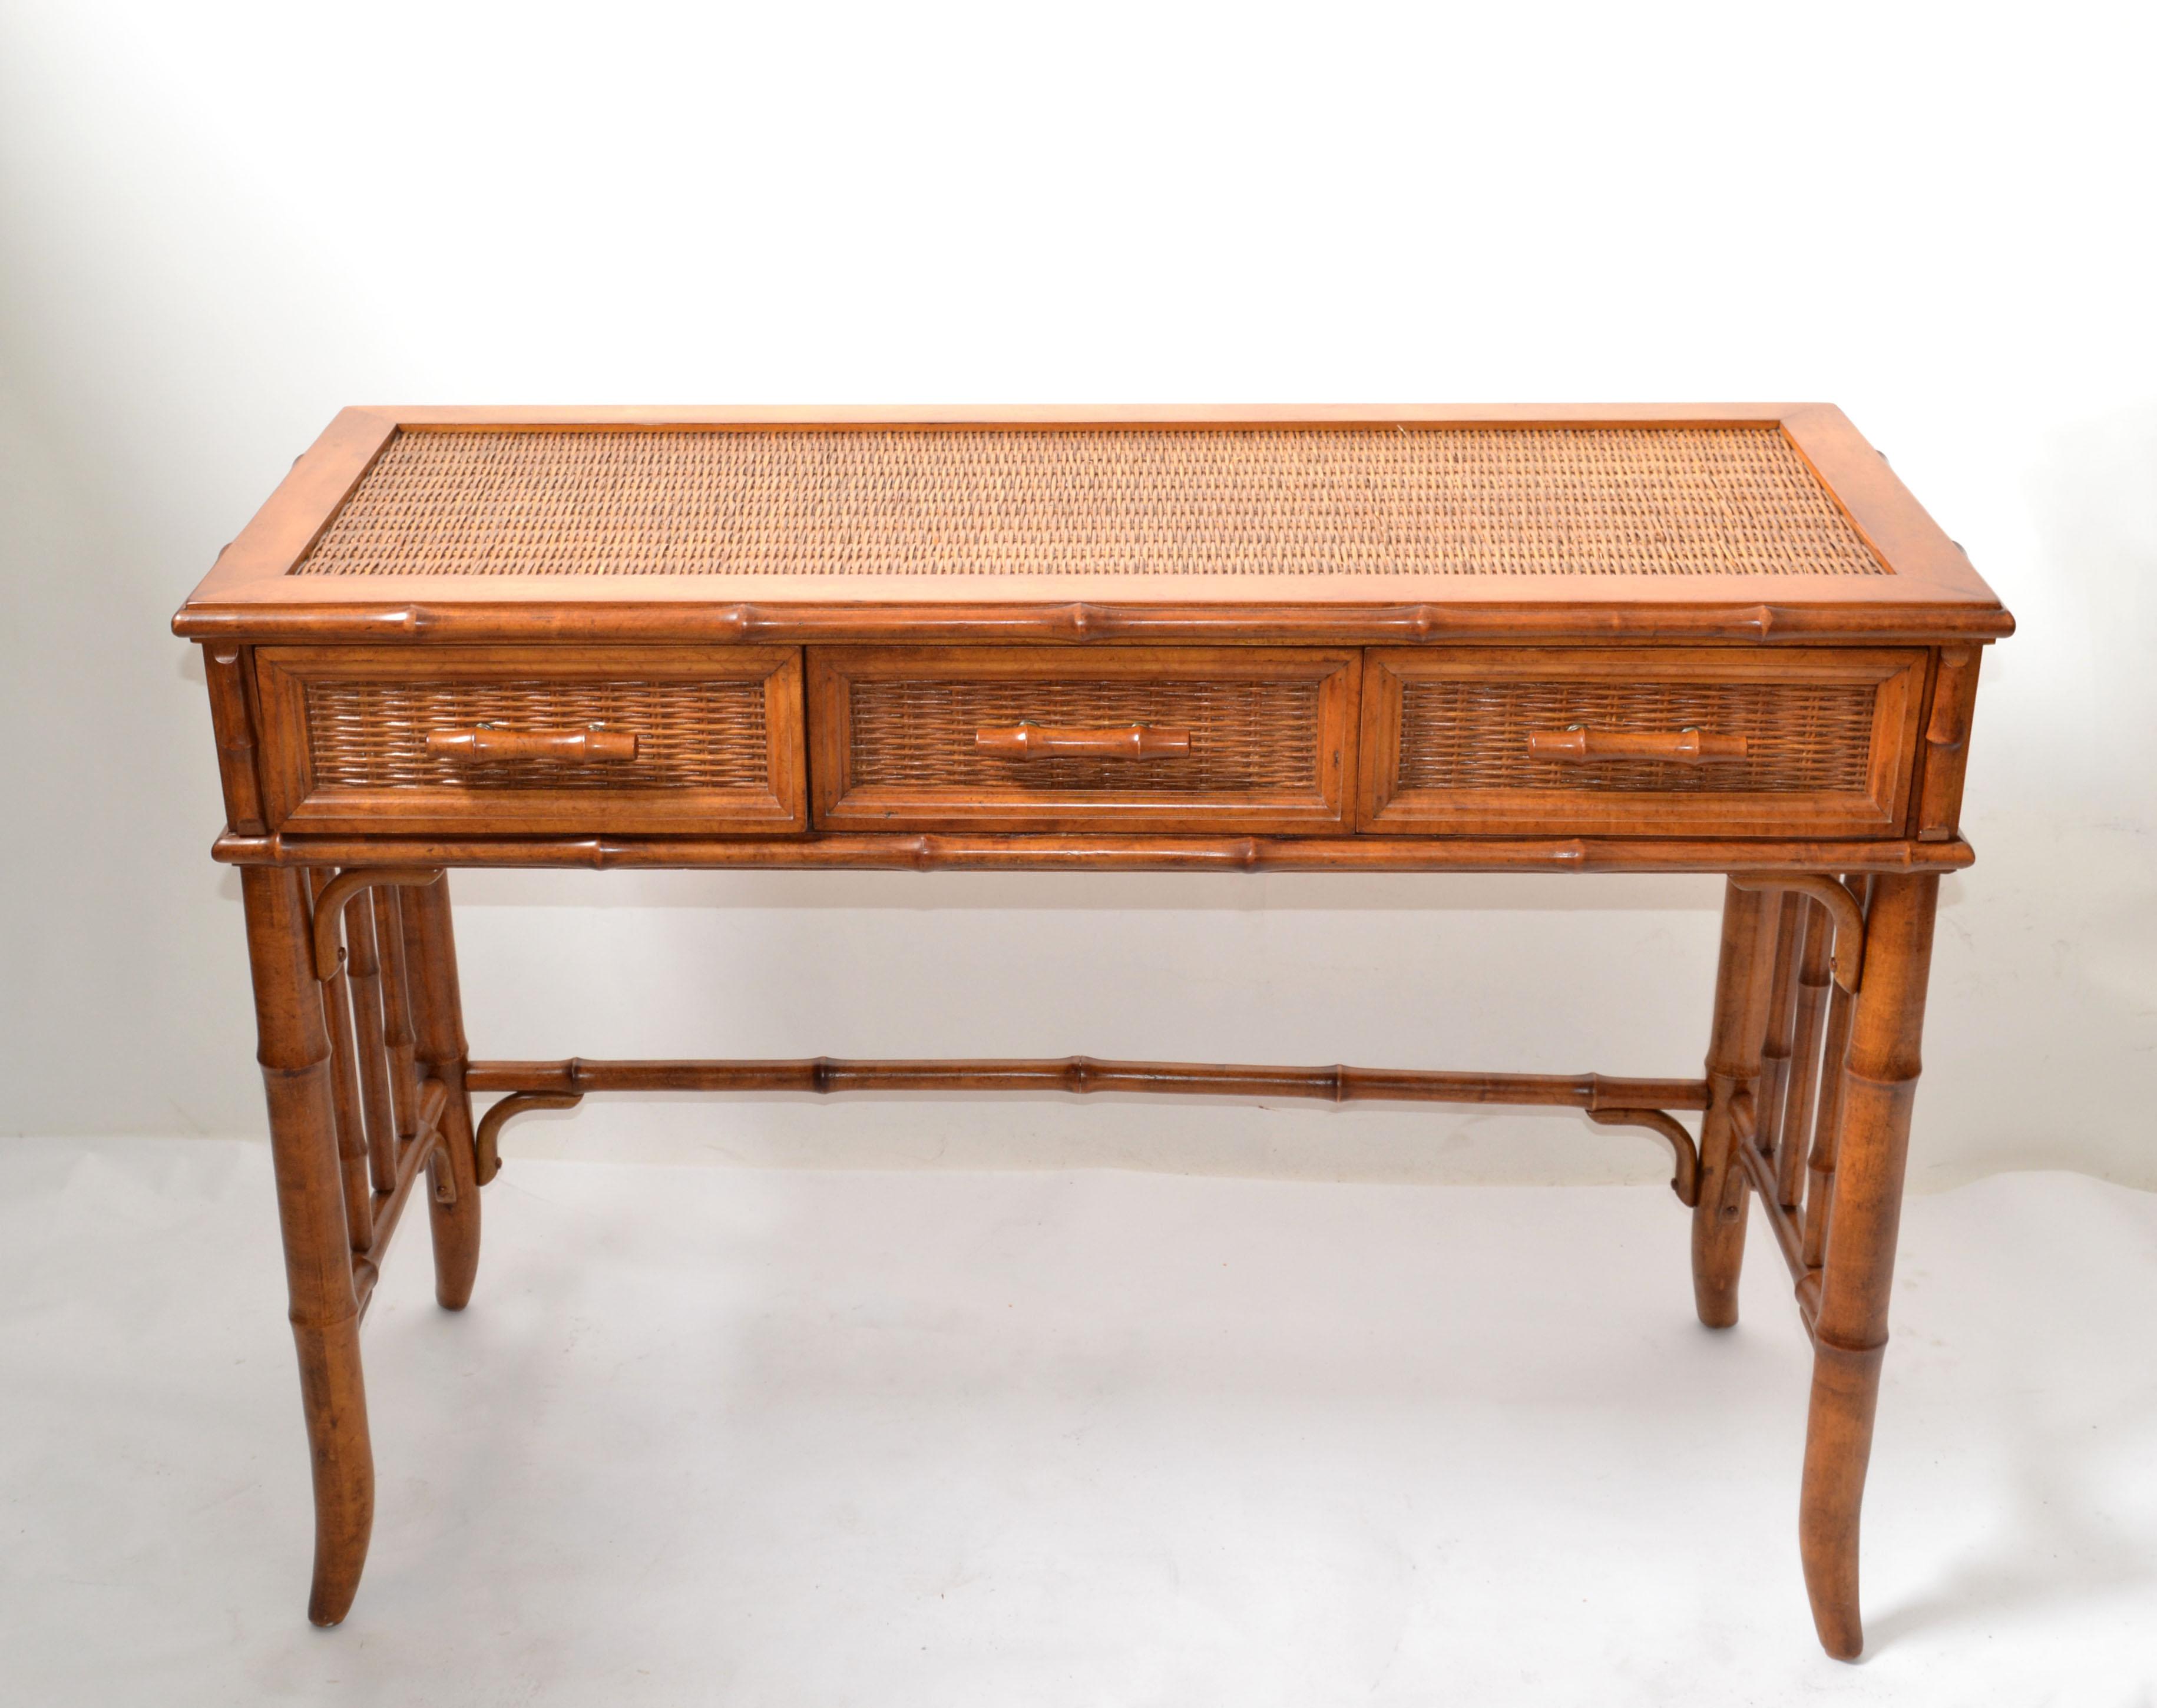 Original McGuire bentwood bamboo and handwoven cane writing table, desk with brass hardware.
McGuire metal tag is missing, was attached inside the Middle Drawer.
Fully restored and ready for a new Home.
Measures: Table knee clearance: 24.5